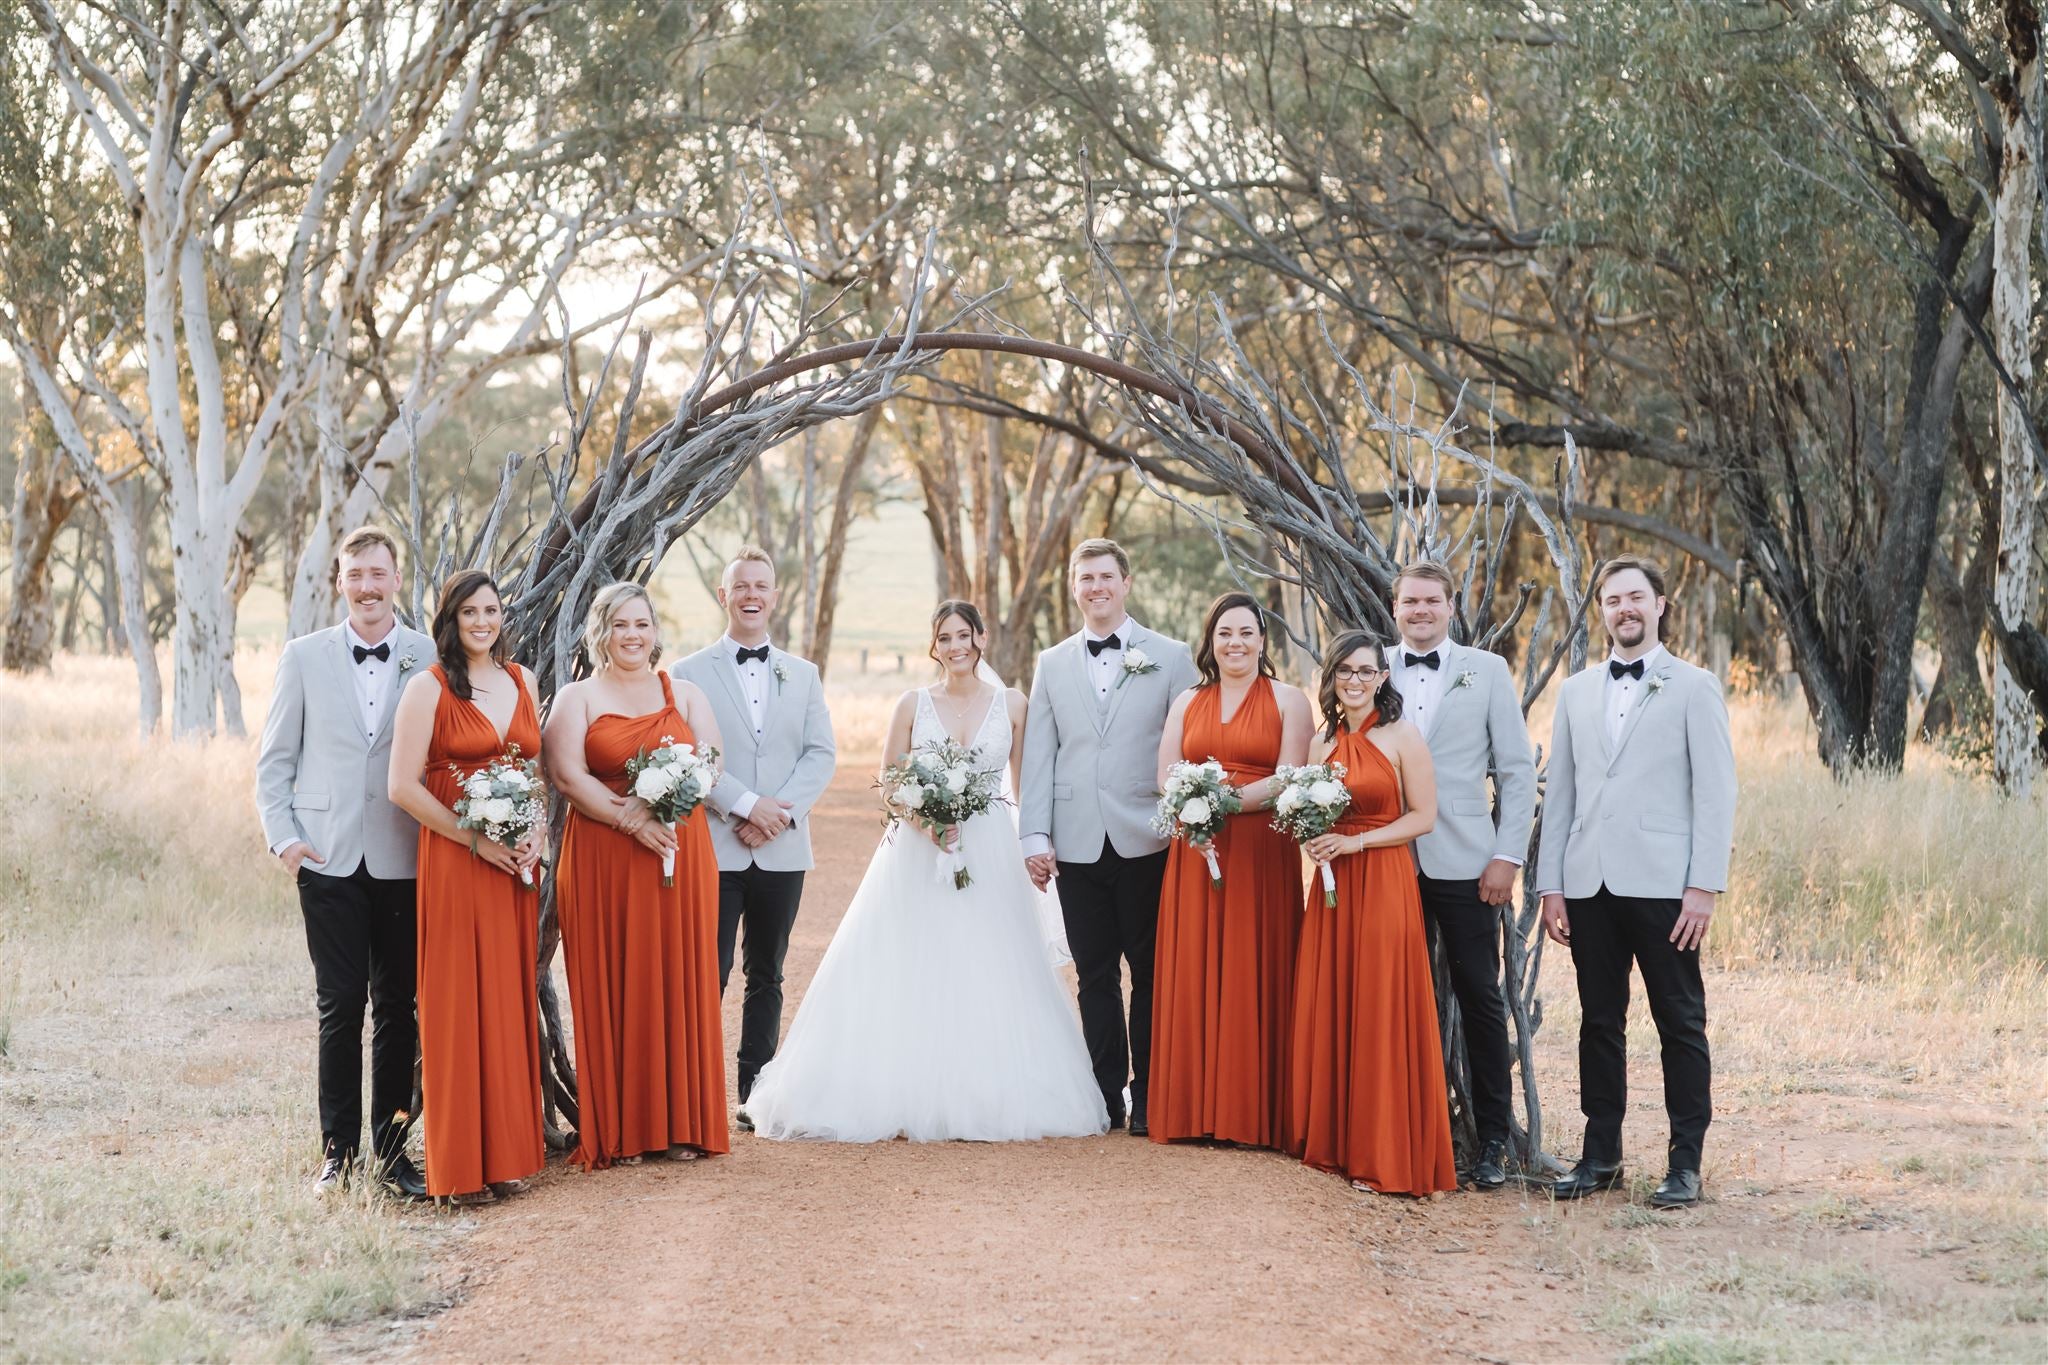 Katelyn + Jayson with their entire Bridal Party at Barton Park